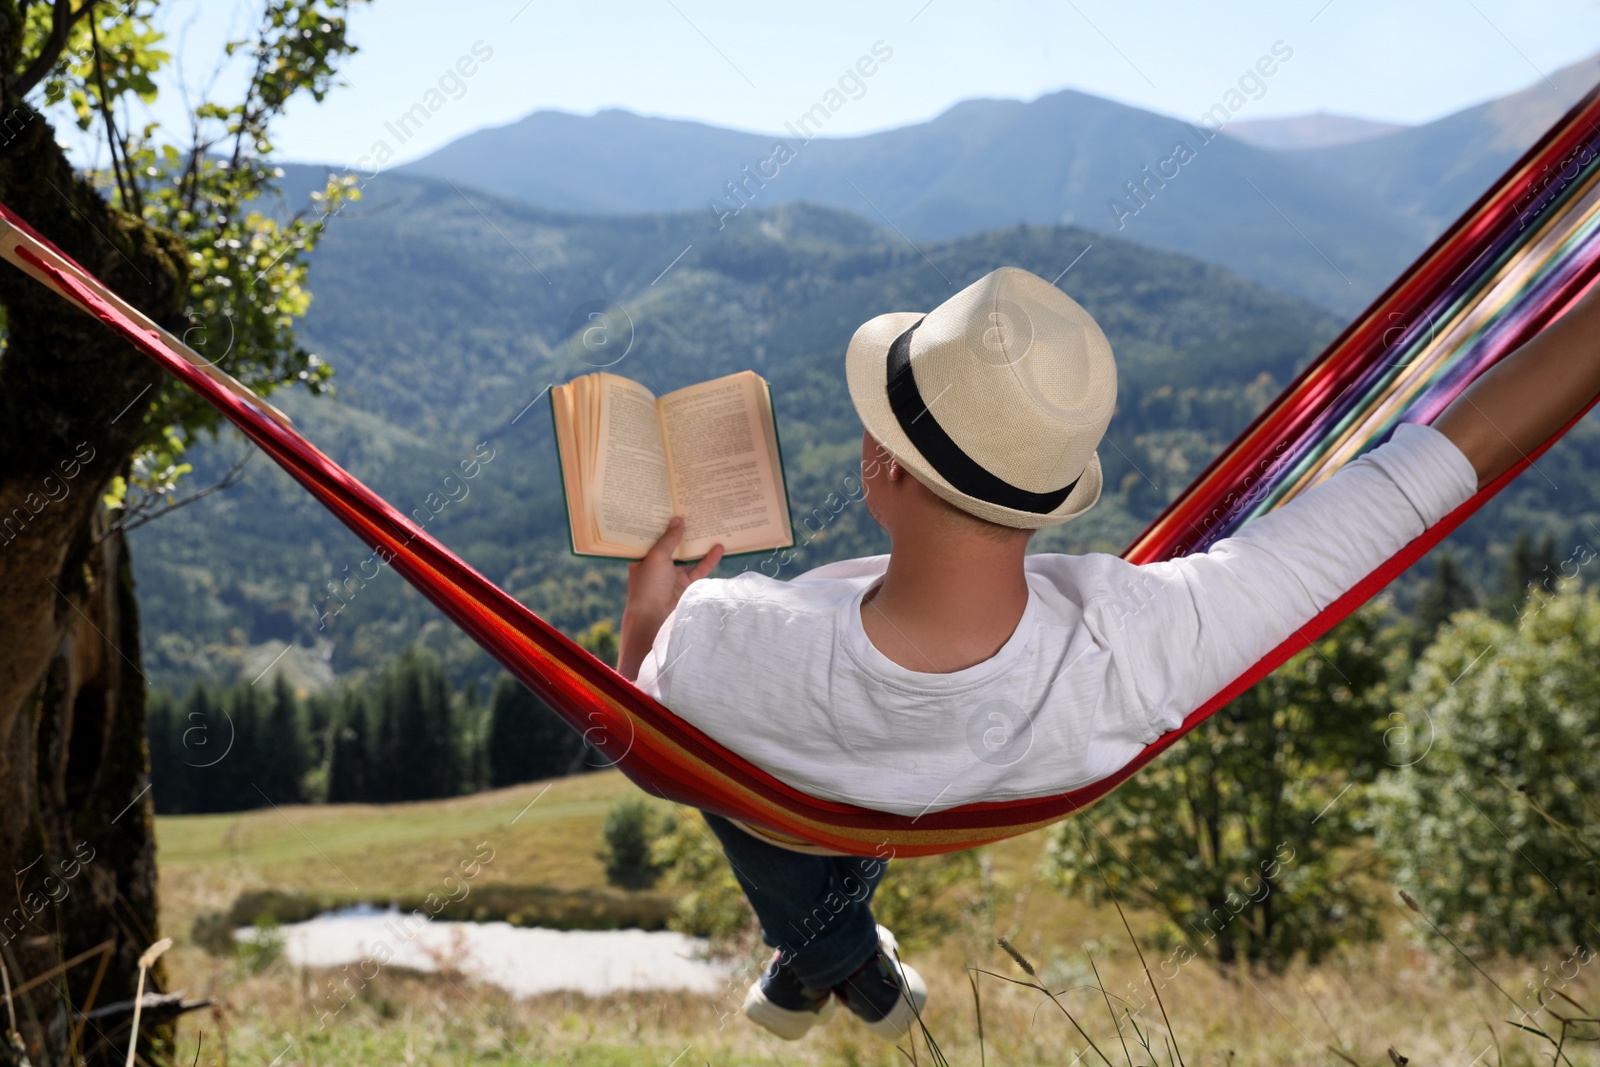 Photo of Man reading book in hammock outdoors on sunny day